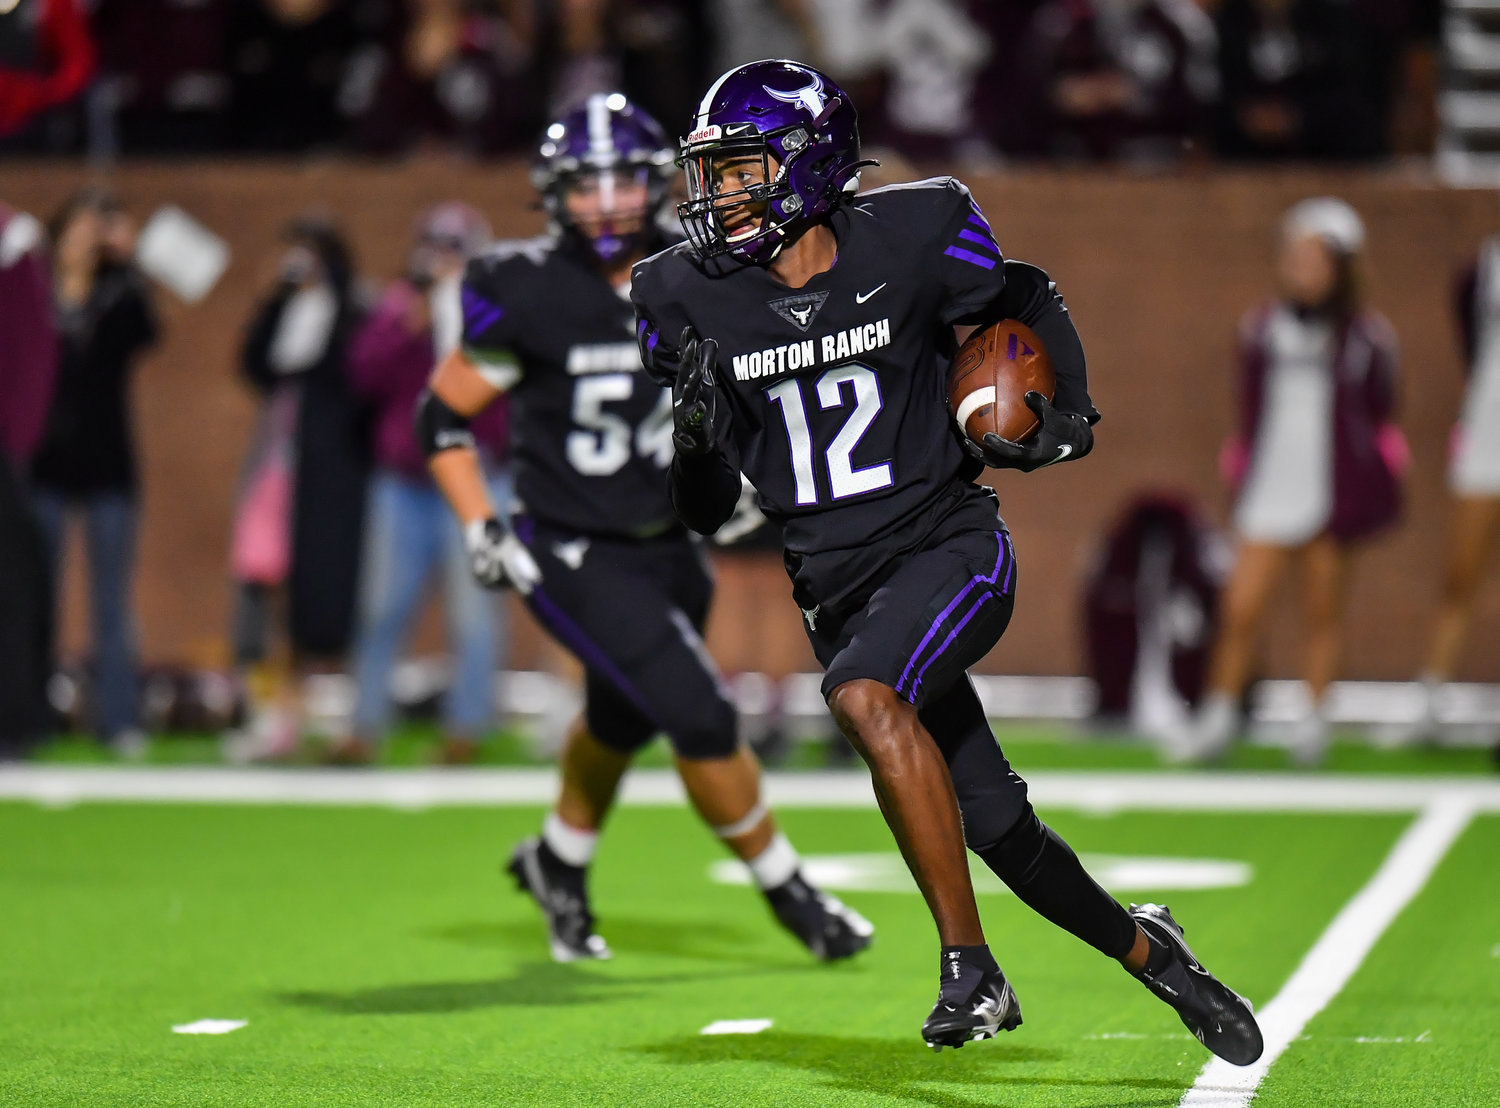 Katy, Tx. Oct 29, 2021: Morton Ranch's Mike Gerald #12 carries the ball during a conference game between Cinco Ranch and Morton Ranch at Rhodes Stadium in Katy. (Photo by Mark Goodman / Katy Times)